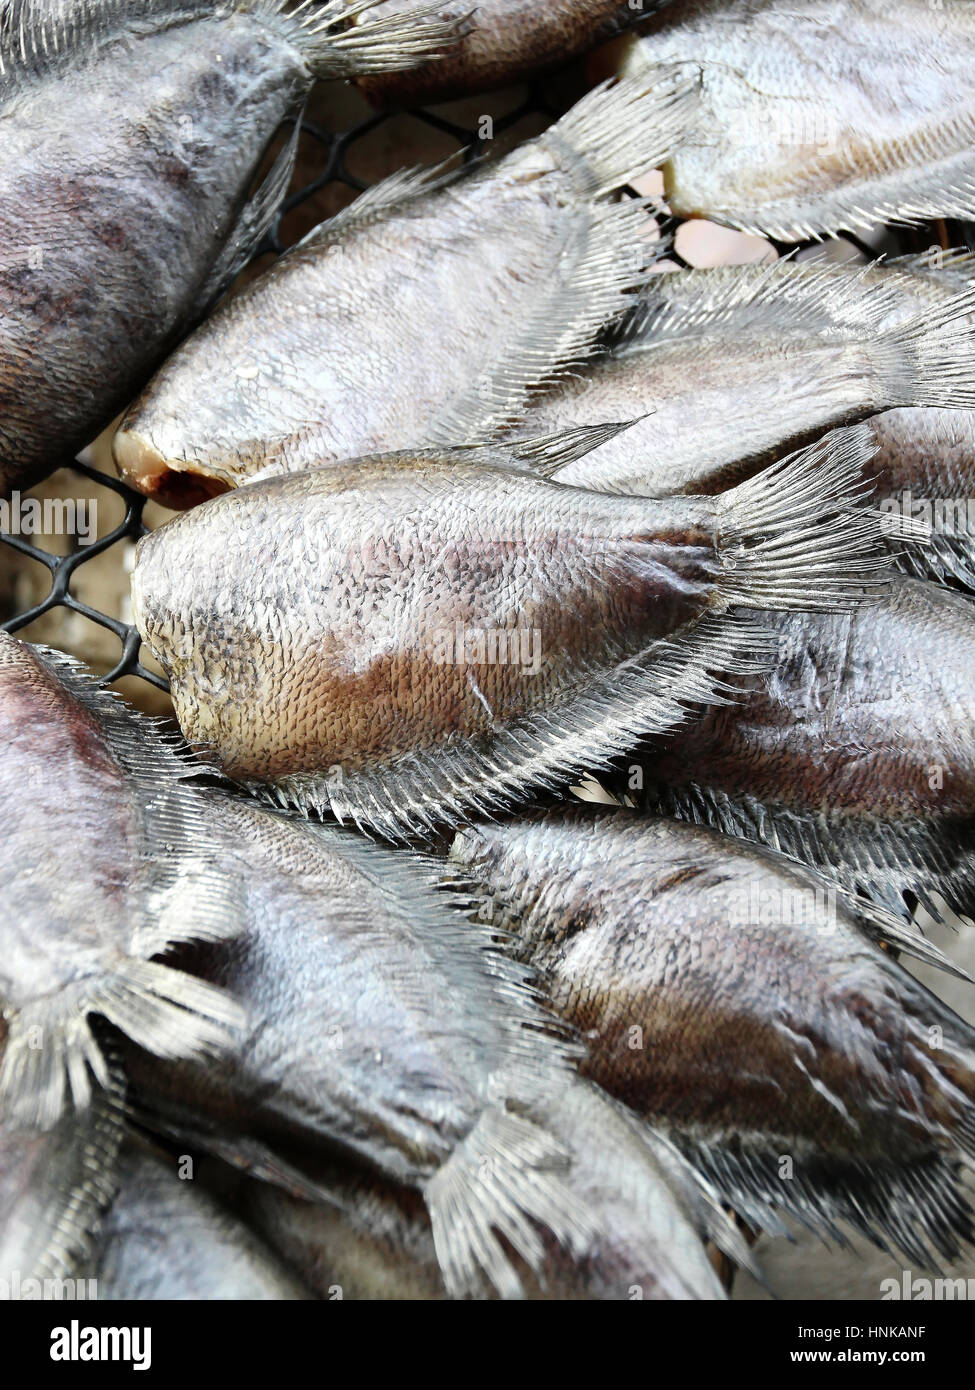 Thai Dried Salted Fish - Snakeskin gourami in the Food Market in Thailand Stock Photo